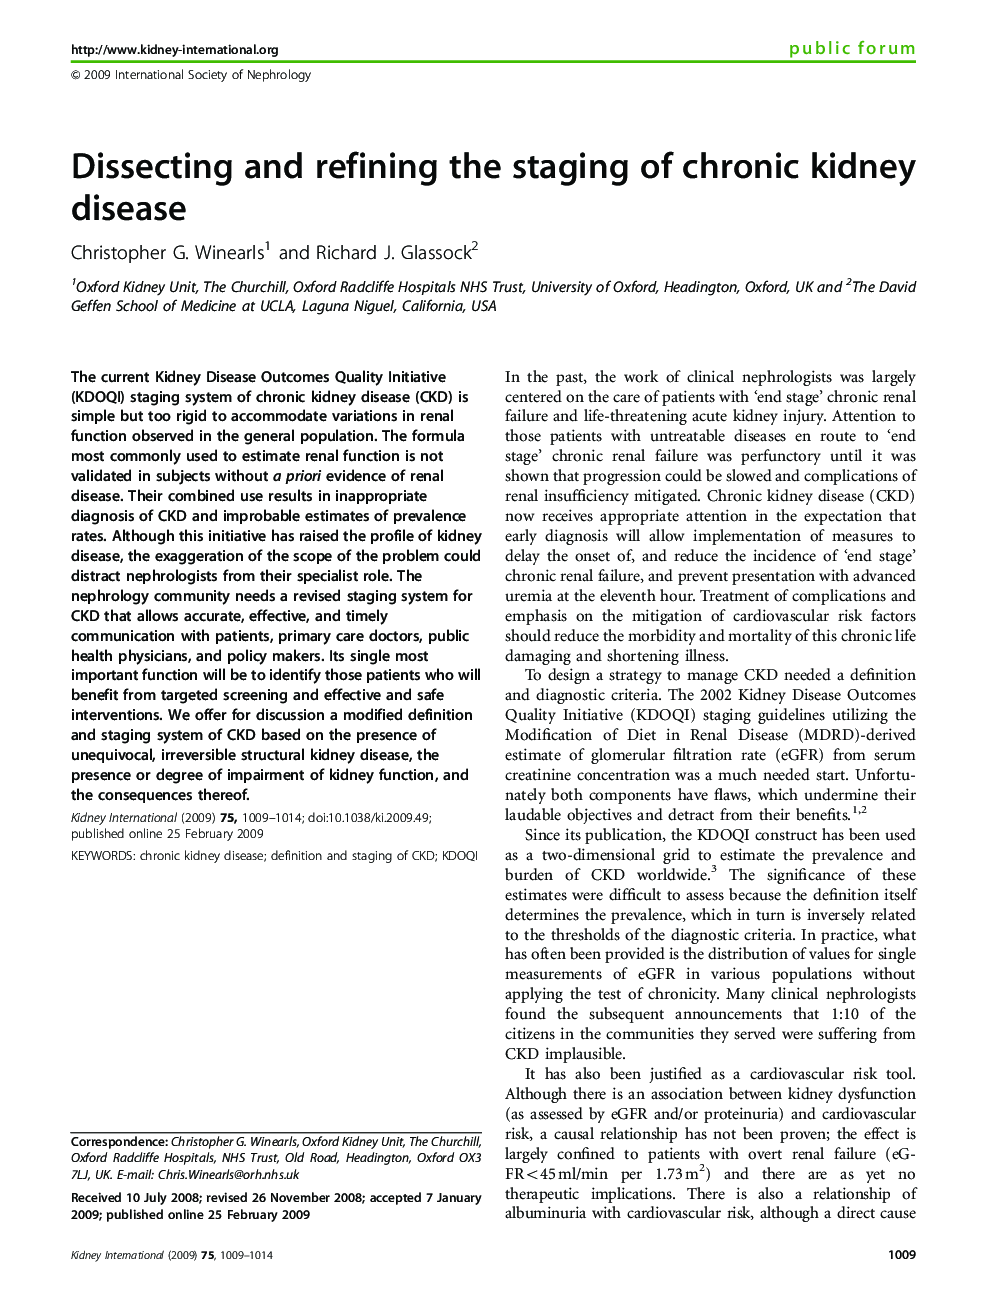 Dissecting and refining the staging of chronic kidney disease 